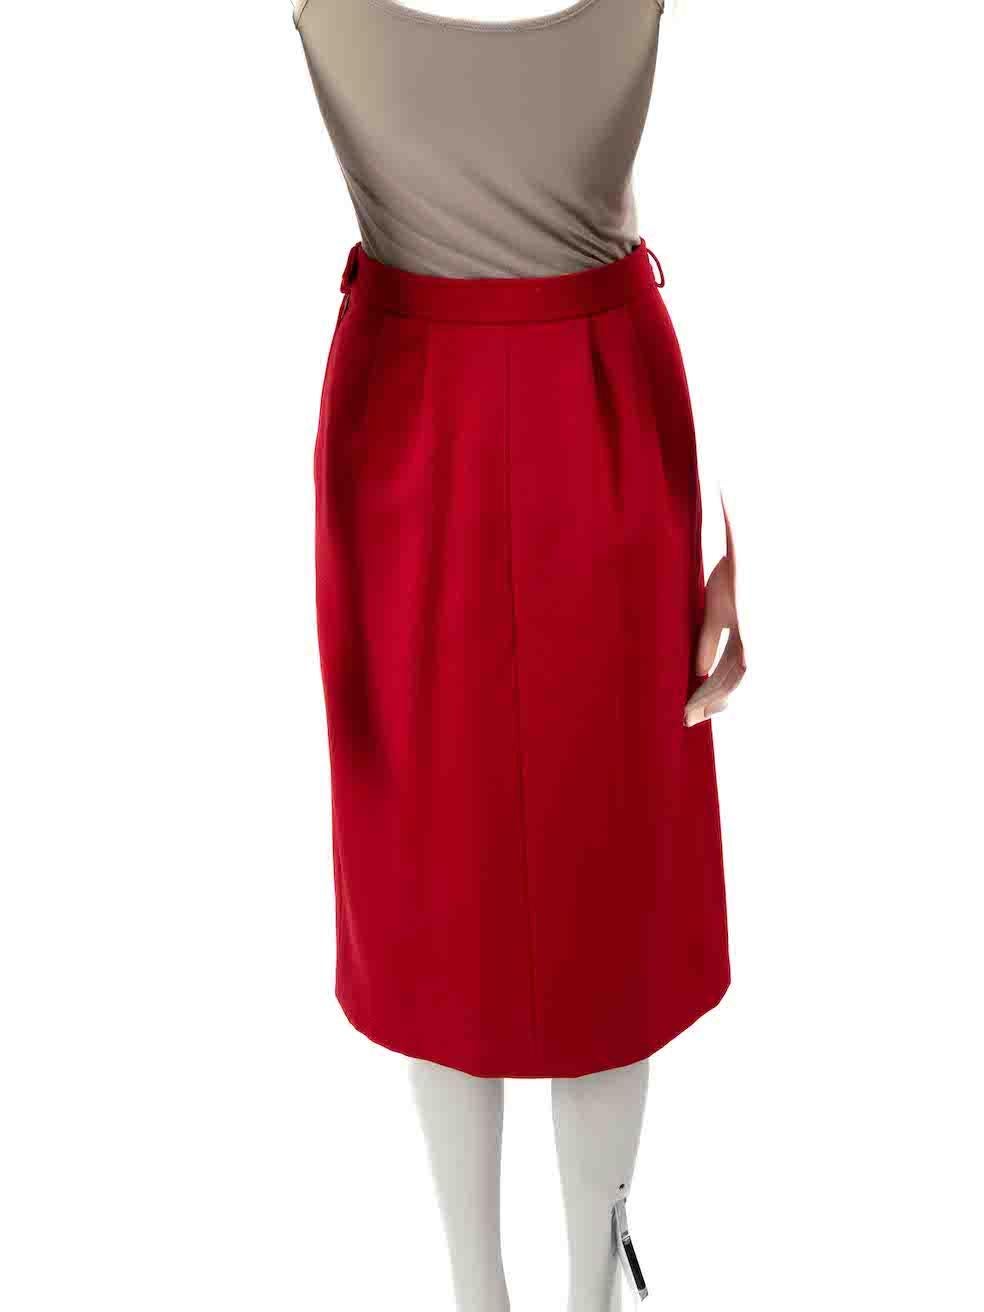 Saint Laurent Vintage Red Knee Length Pencil Skirt Size S In Excellent Condition For Sale In London, GB